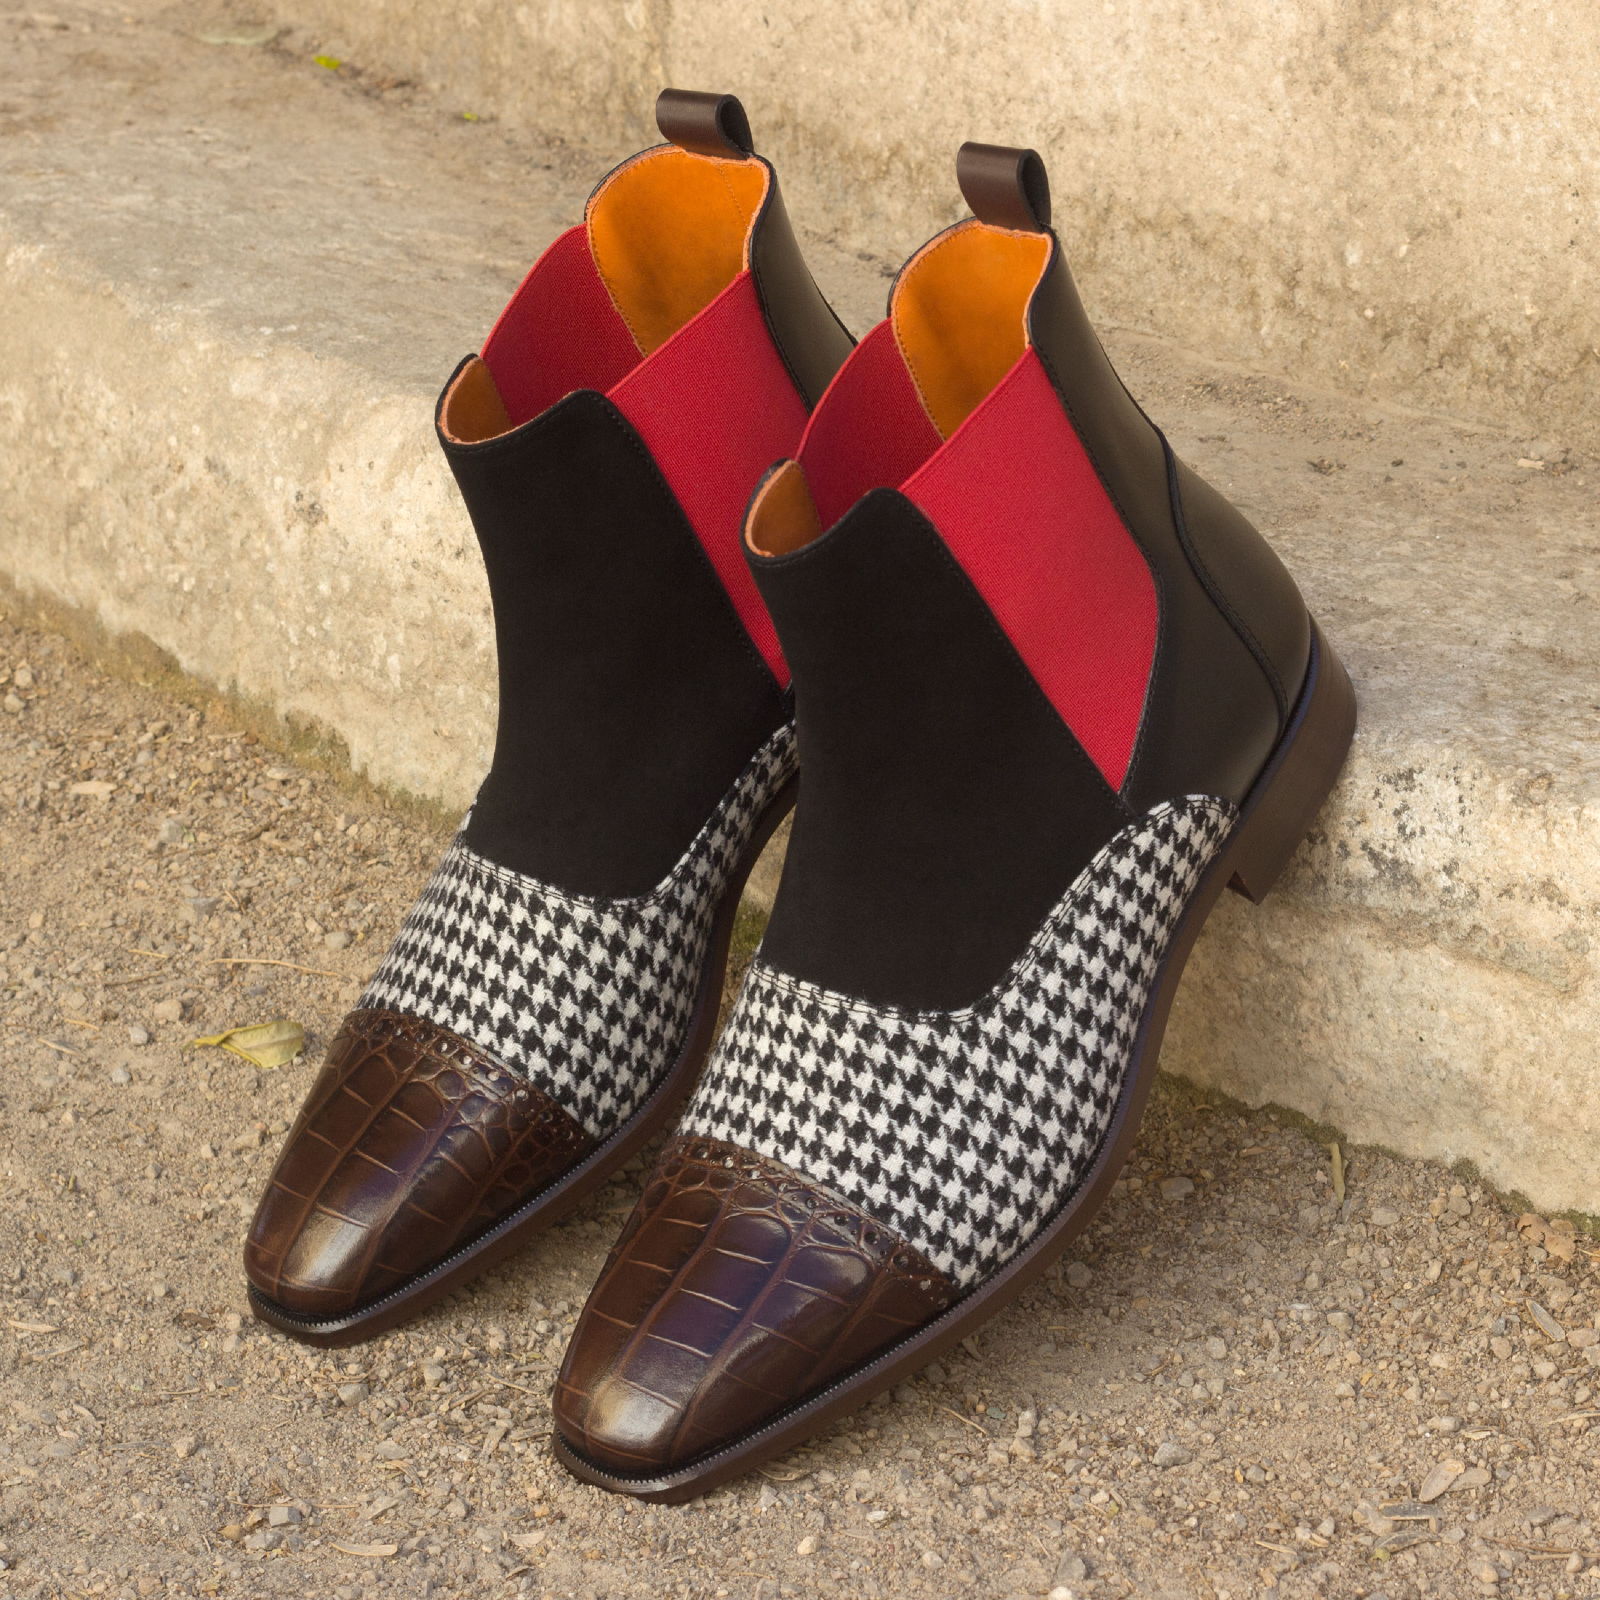 Black Calf & Houndstooth Chelsea Boot